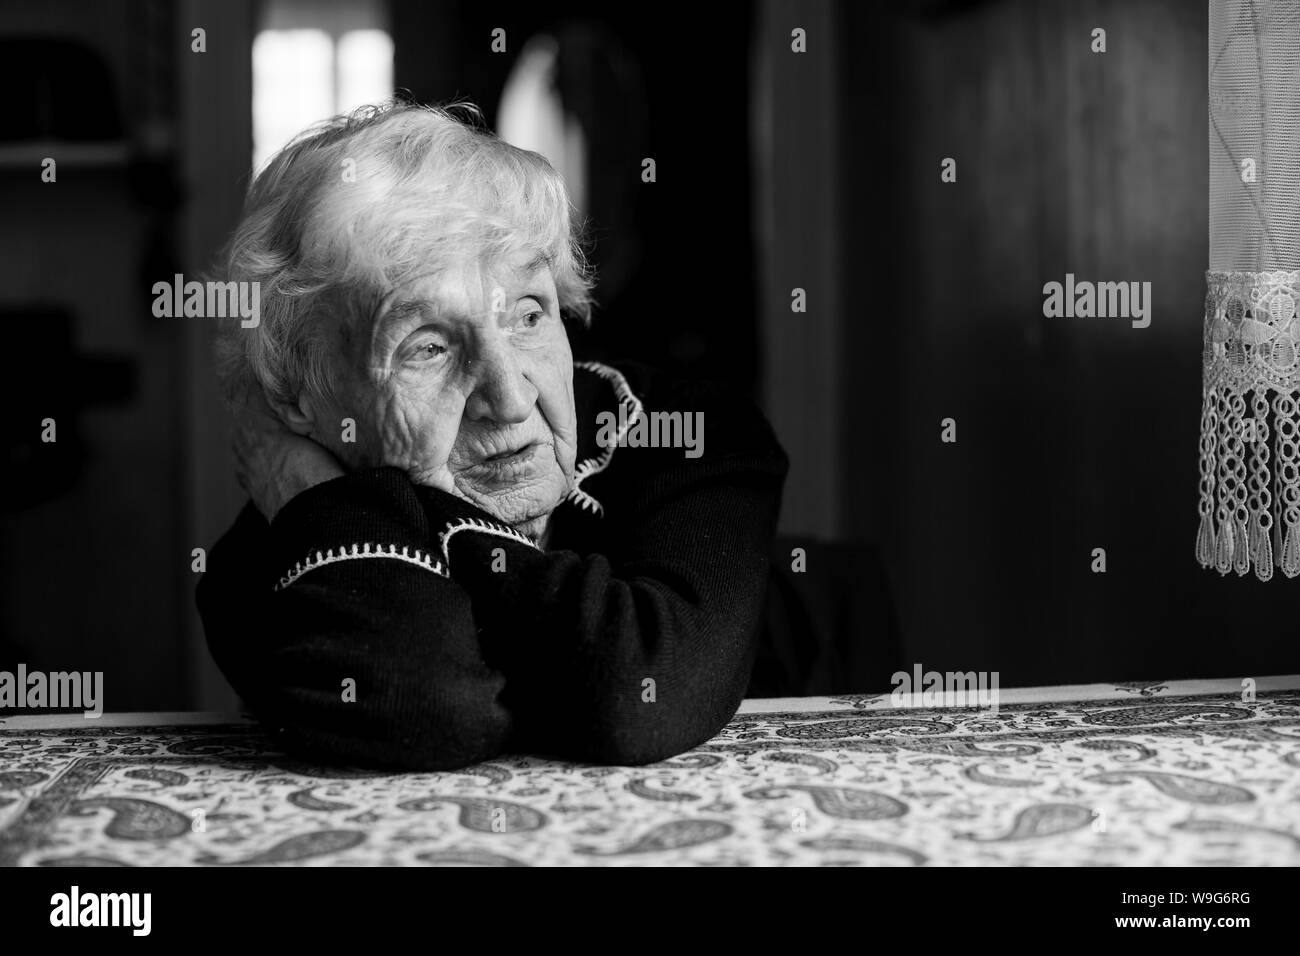 Lonely sad old woman. Black and white photo. Stock Photo